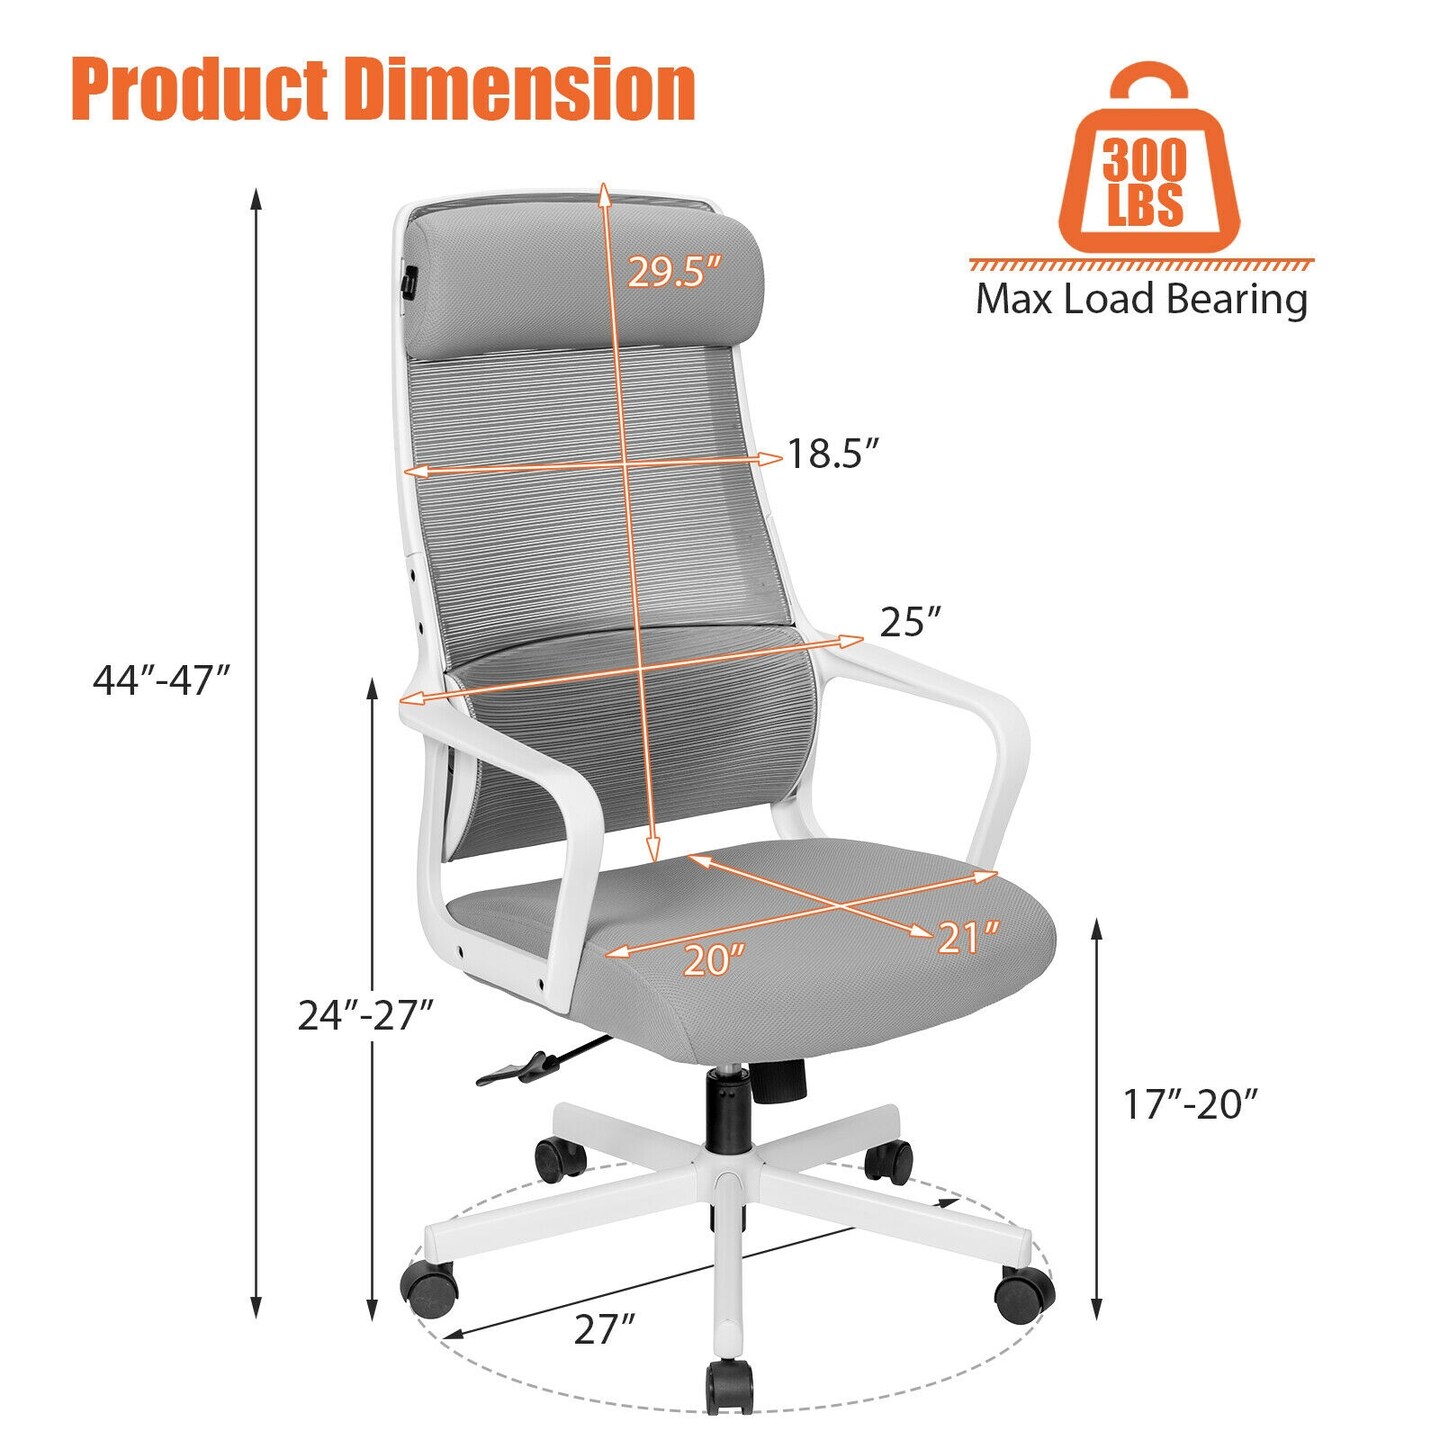 Adjustable Mesh Office Chair with Heating Support Headrest